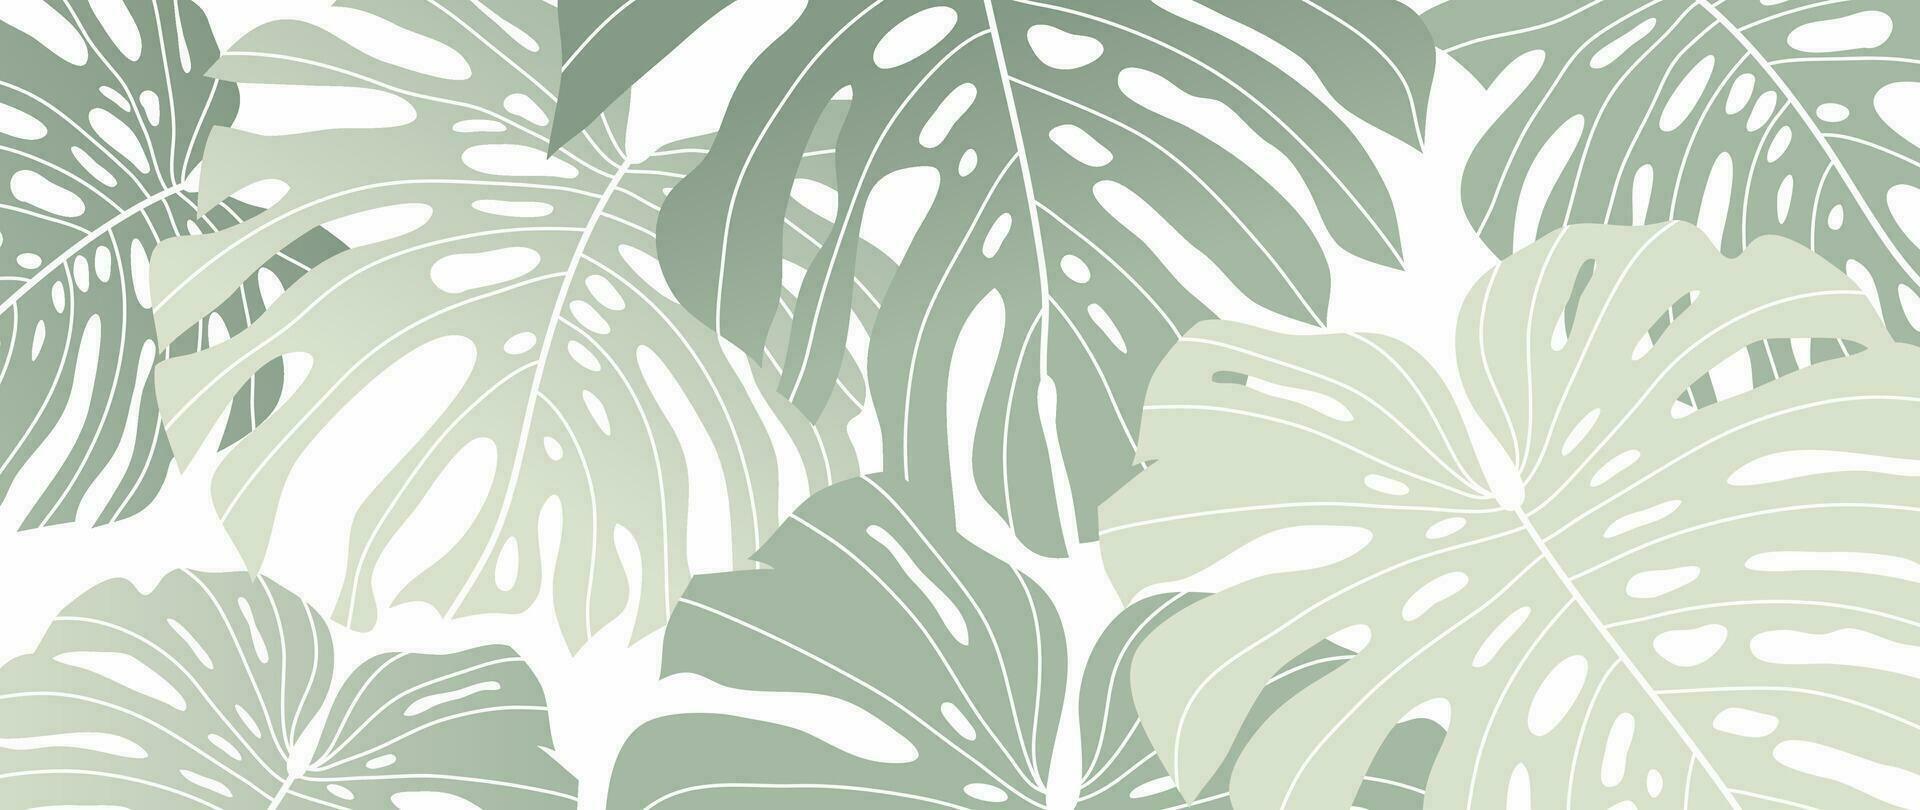 Abstract foliage botanical background vector. Green and white color wallpaper of tropical plants, monstera, leaf branches, leaves. Foliage design for banner, prints, decor, wall art, decoration. vector